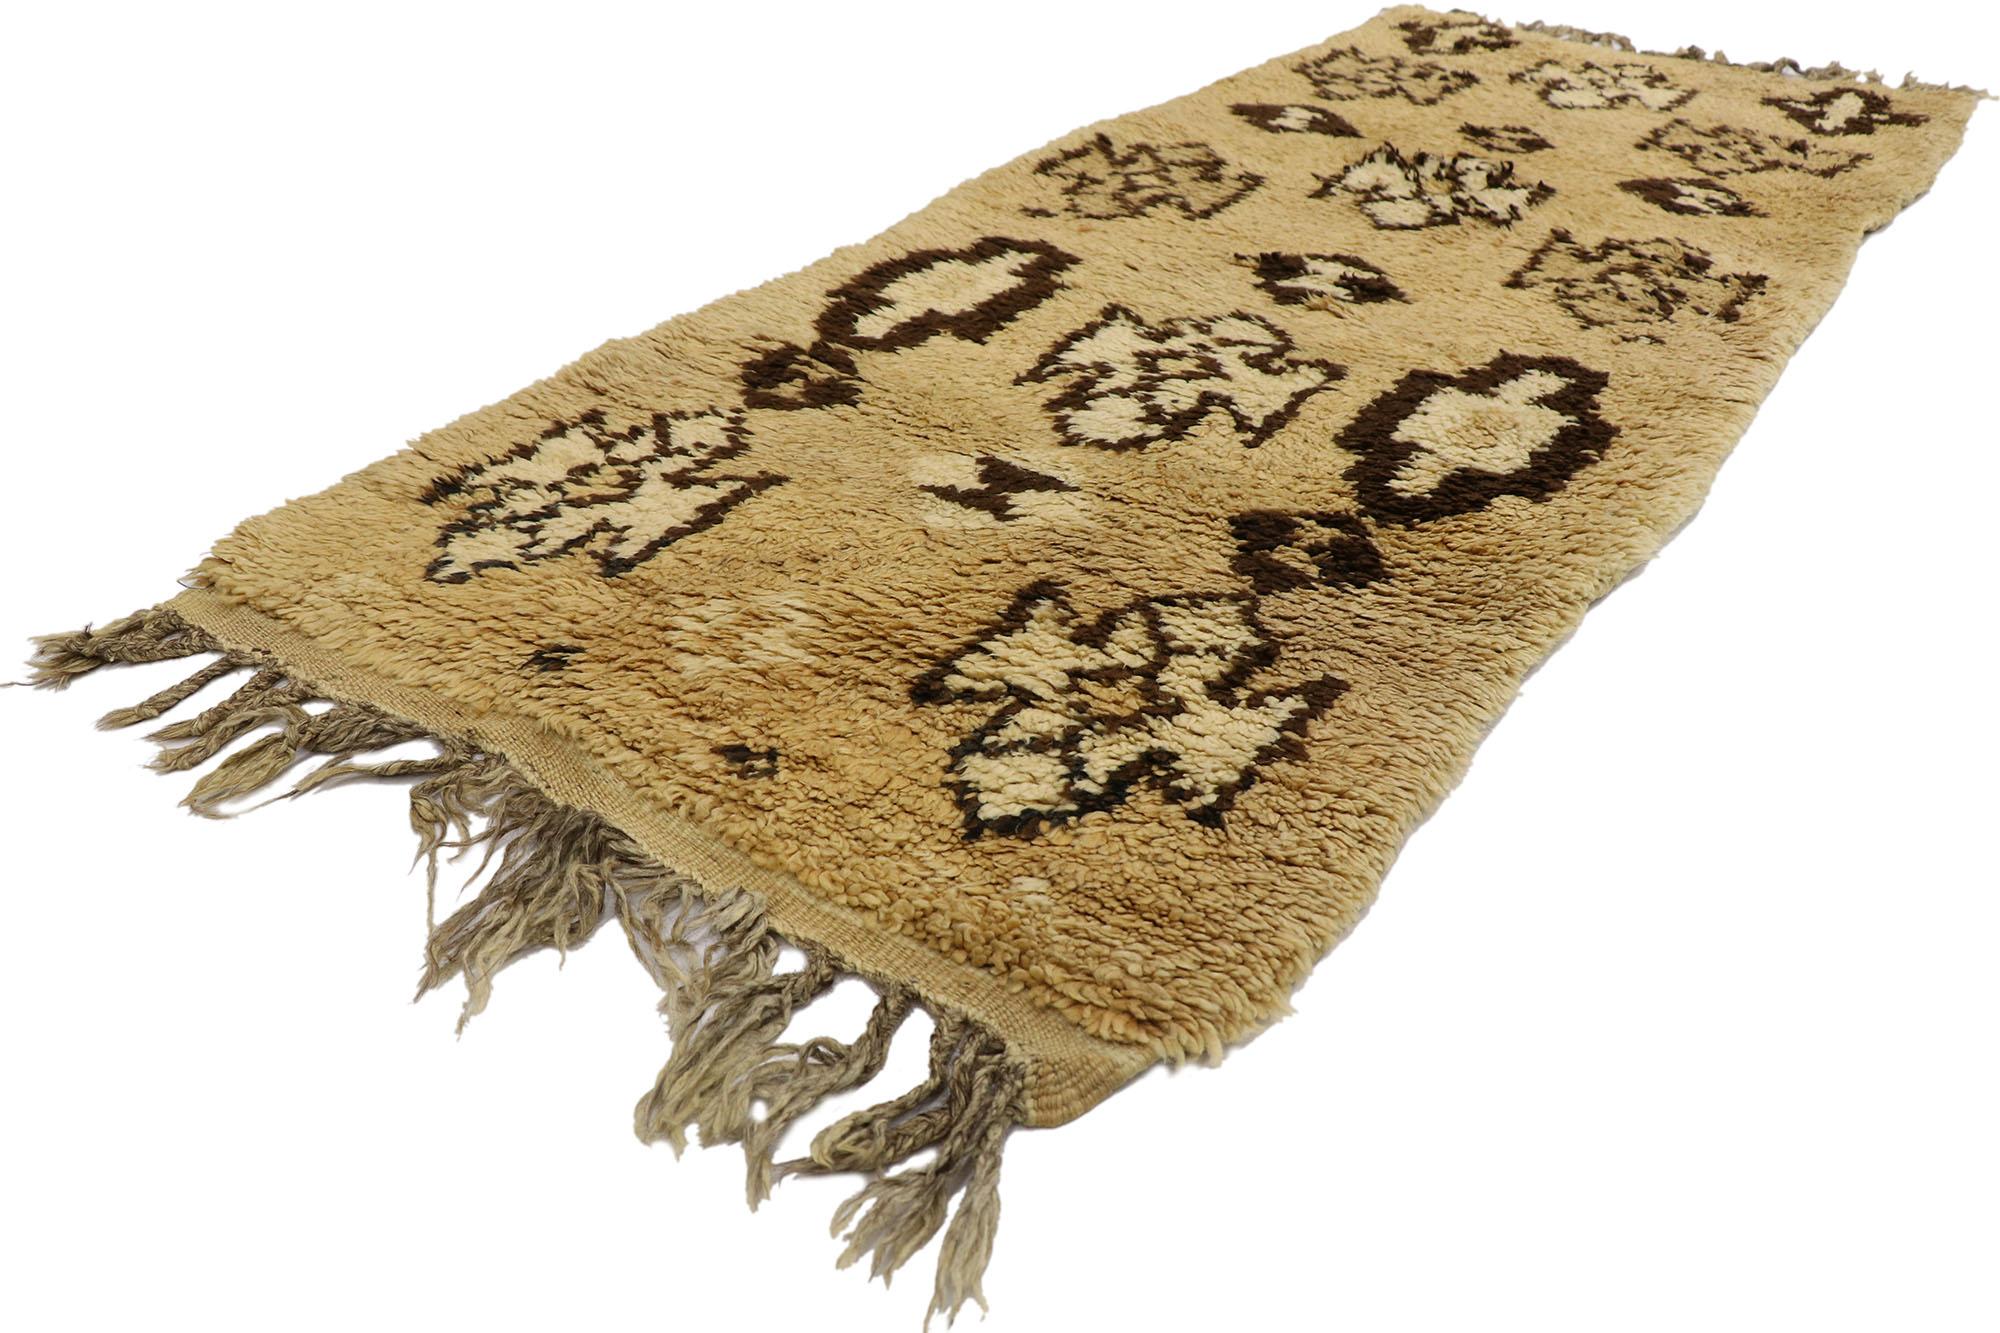 21567 vintage Berber Moroccan rug with Tribal style 02'07 x 06'02. With its simplicity, incredible detail and texture, this hand knotted wool vintage Berber Moroccan rug is a captivating vision of woven beauty. The abrashed camel colored field